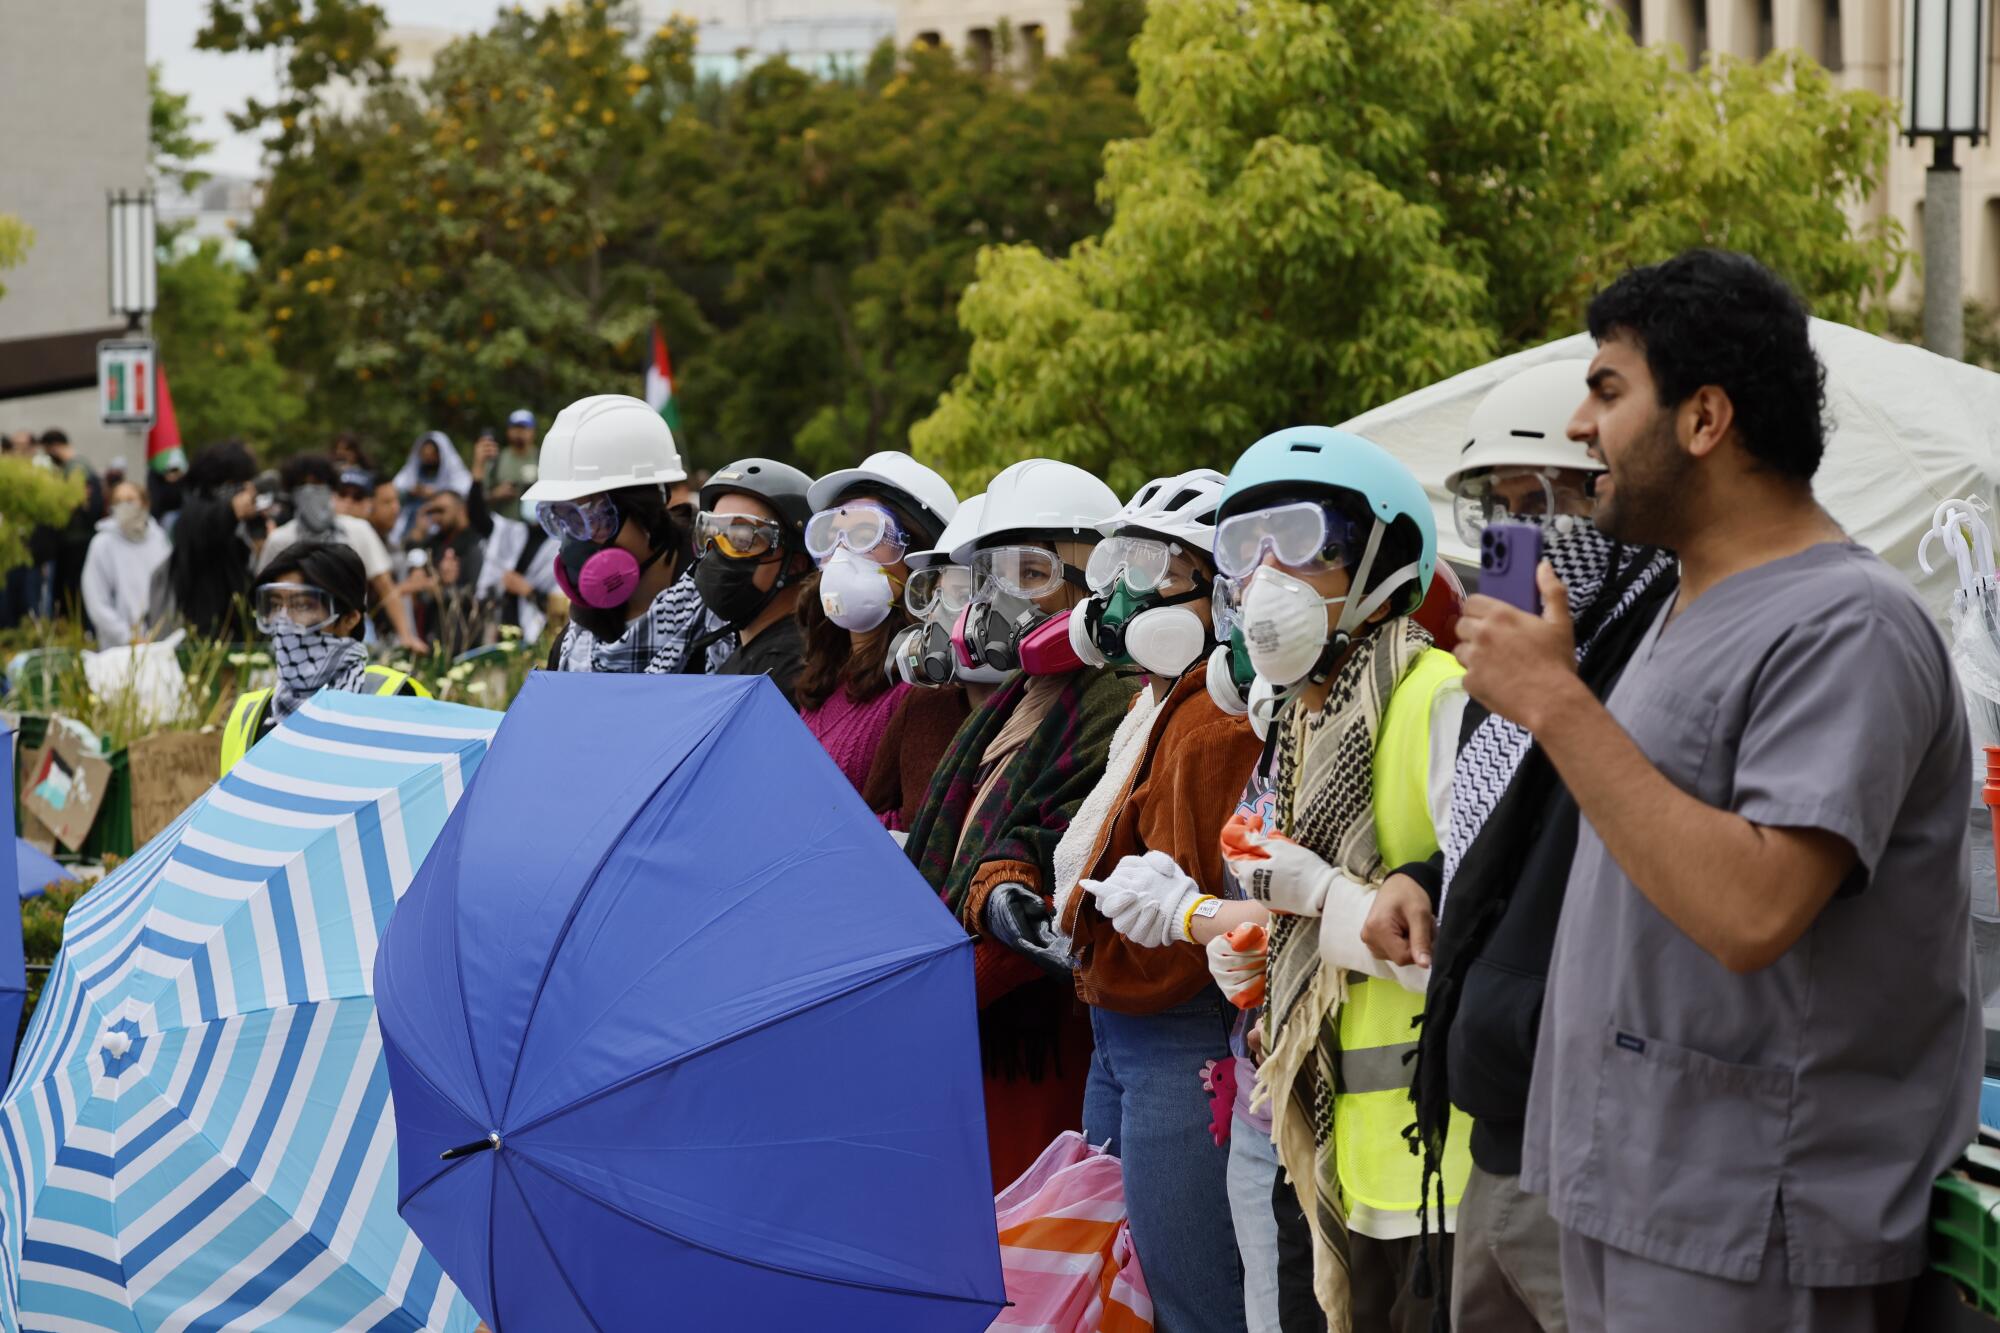 Pro-Palestinian protesters with masks and helmets linking arms to form a blockade, some holding open umbrellas